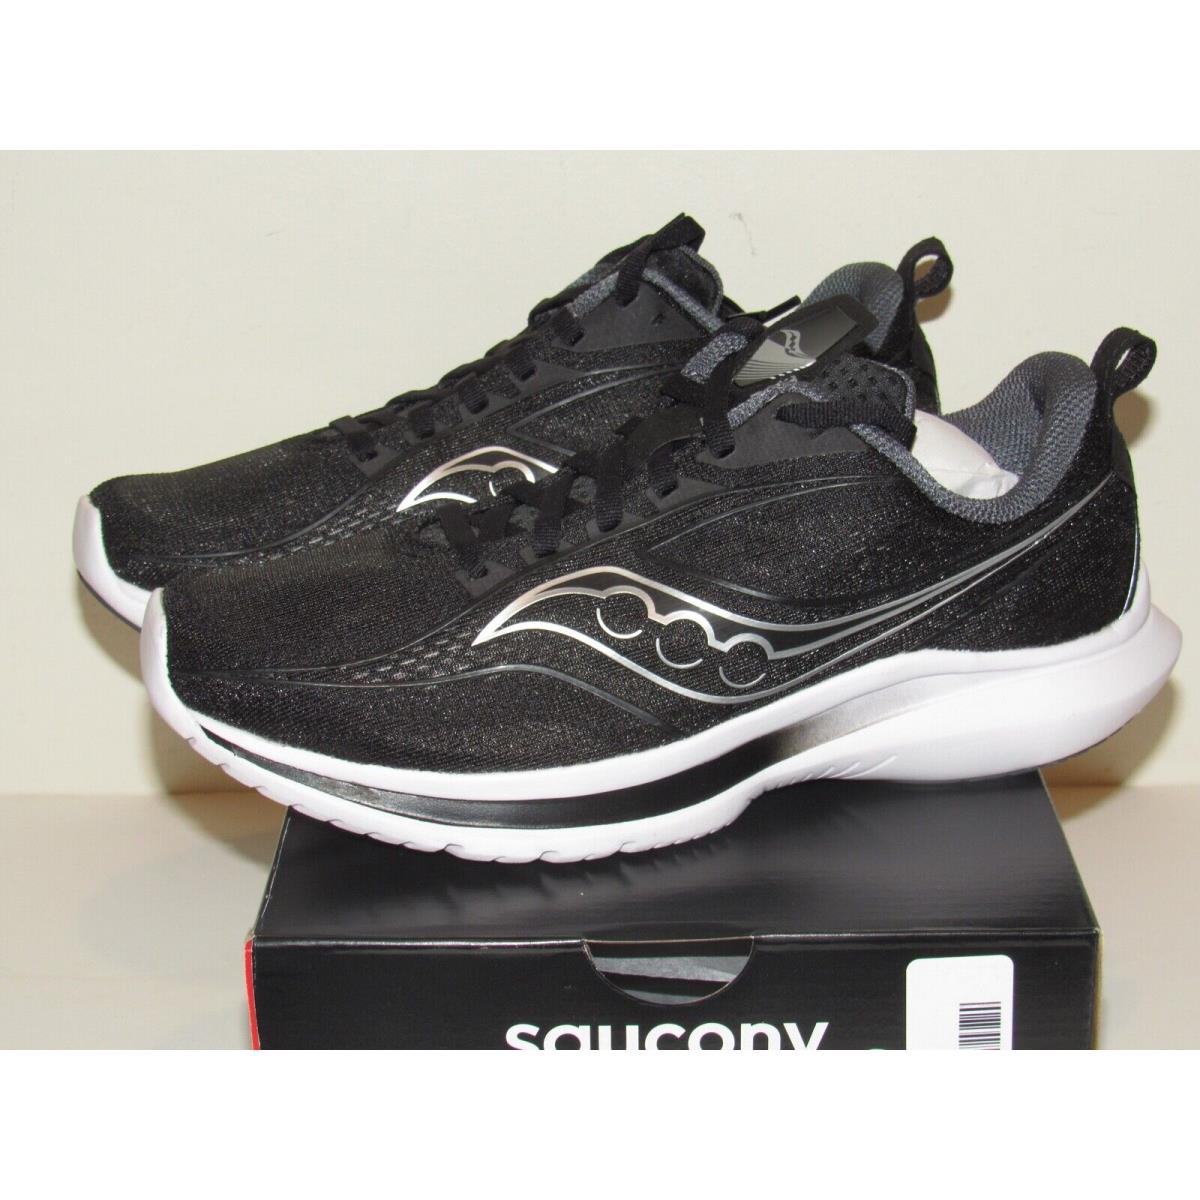 Saucony Kinvara 13 Womens Size 9 D Wide Running Shoe Sneakers Black Silver